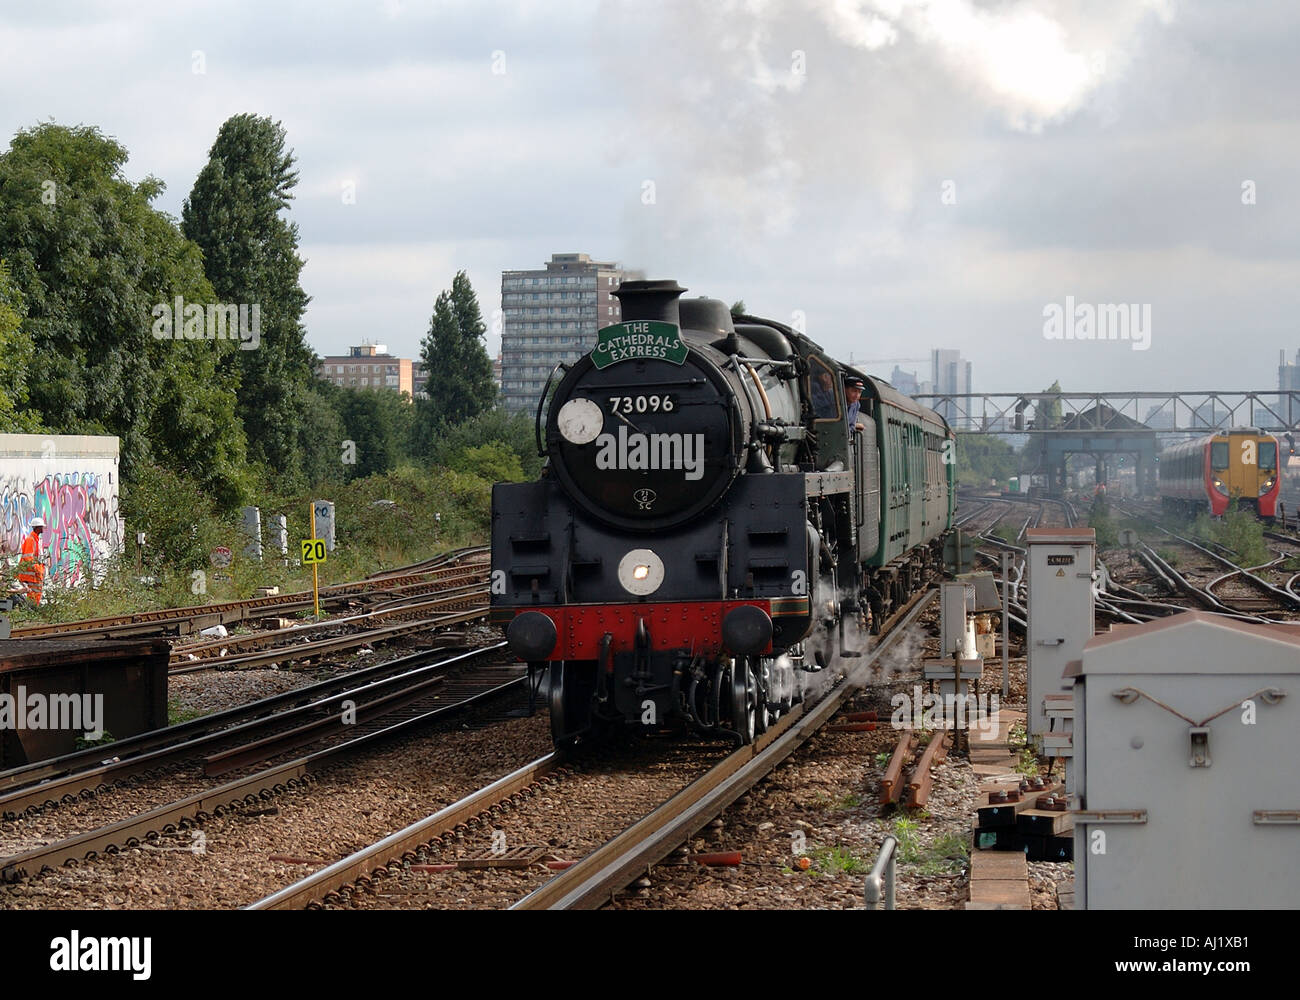 Class 5 locomotive hauling The Cathedrals Express at Clapham Junction Stock Photo